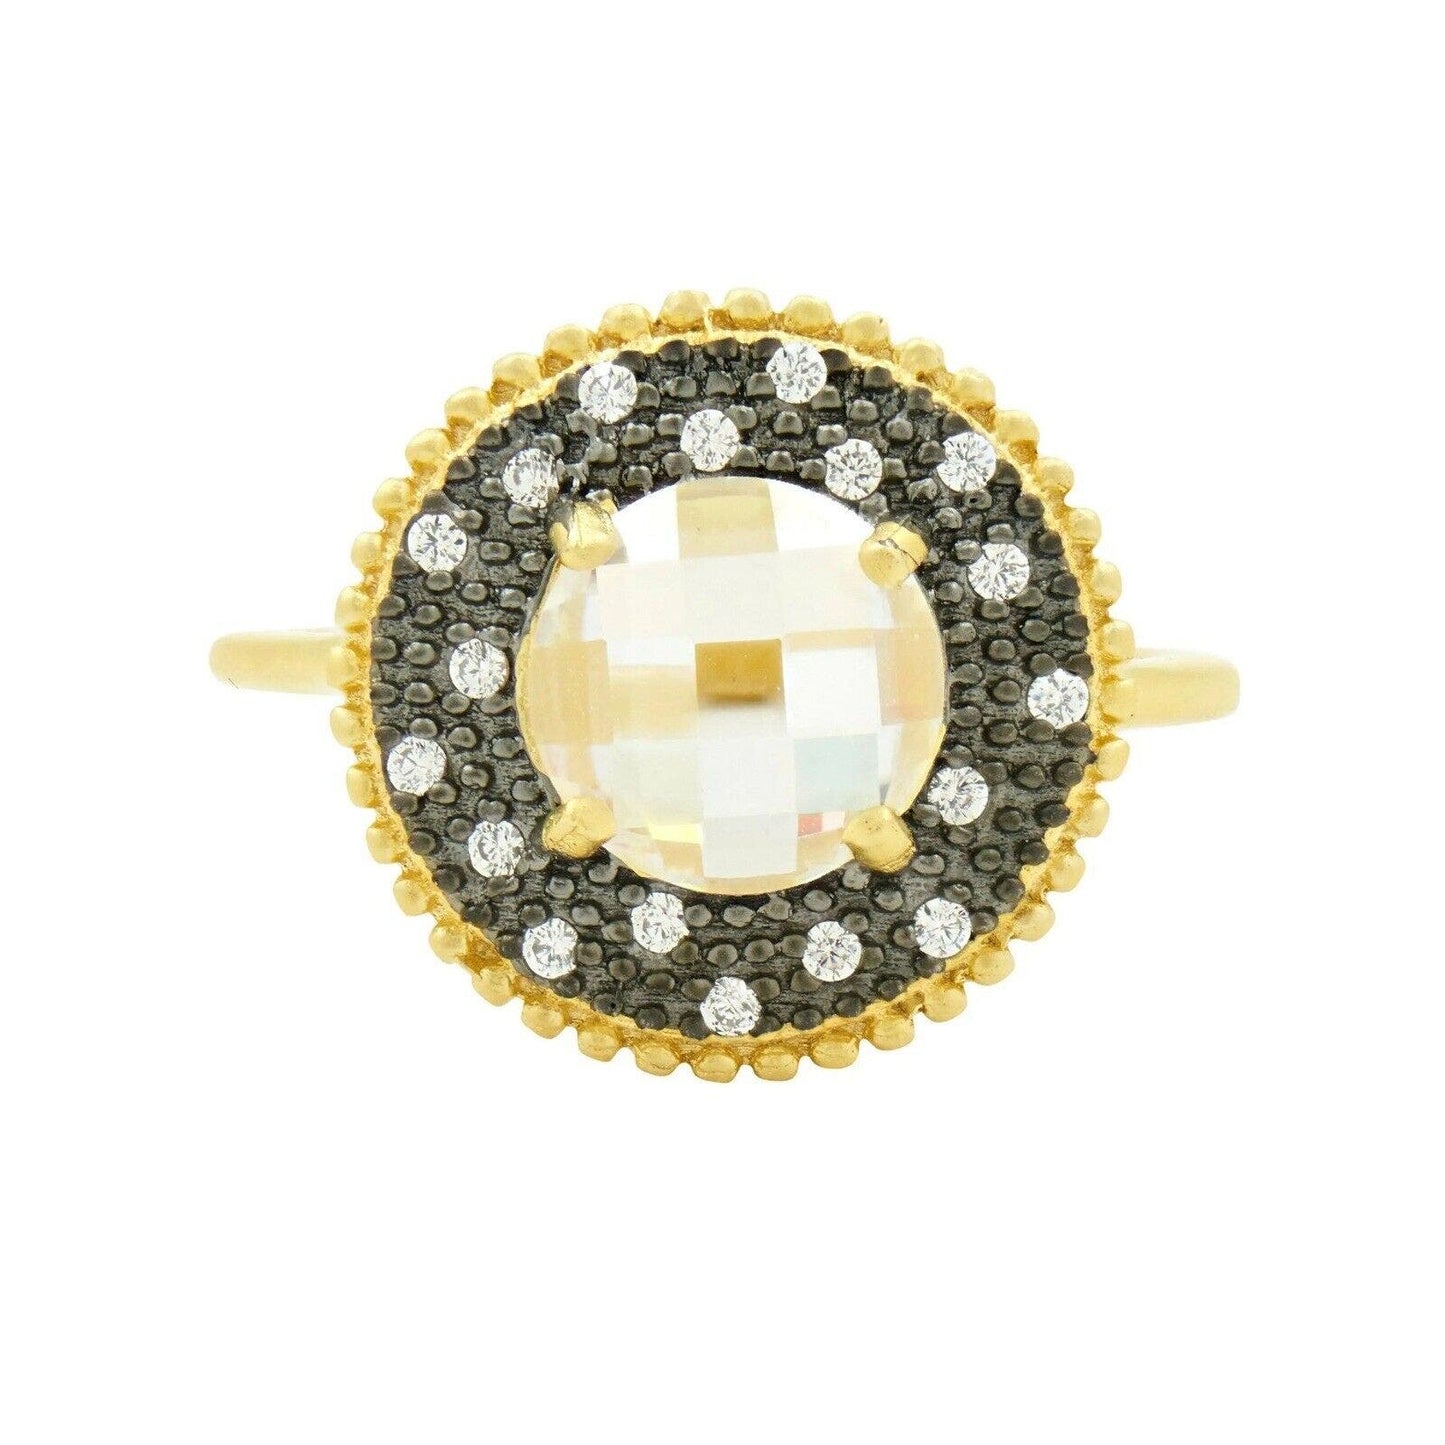 Freida Rothman Stunning, Faceted Stone Cocktail Ring Size 7